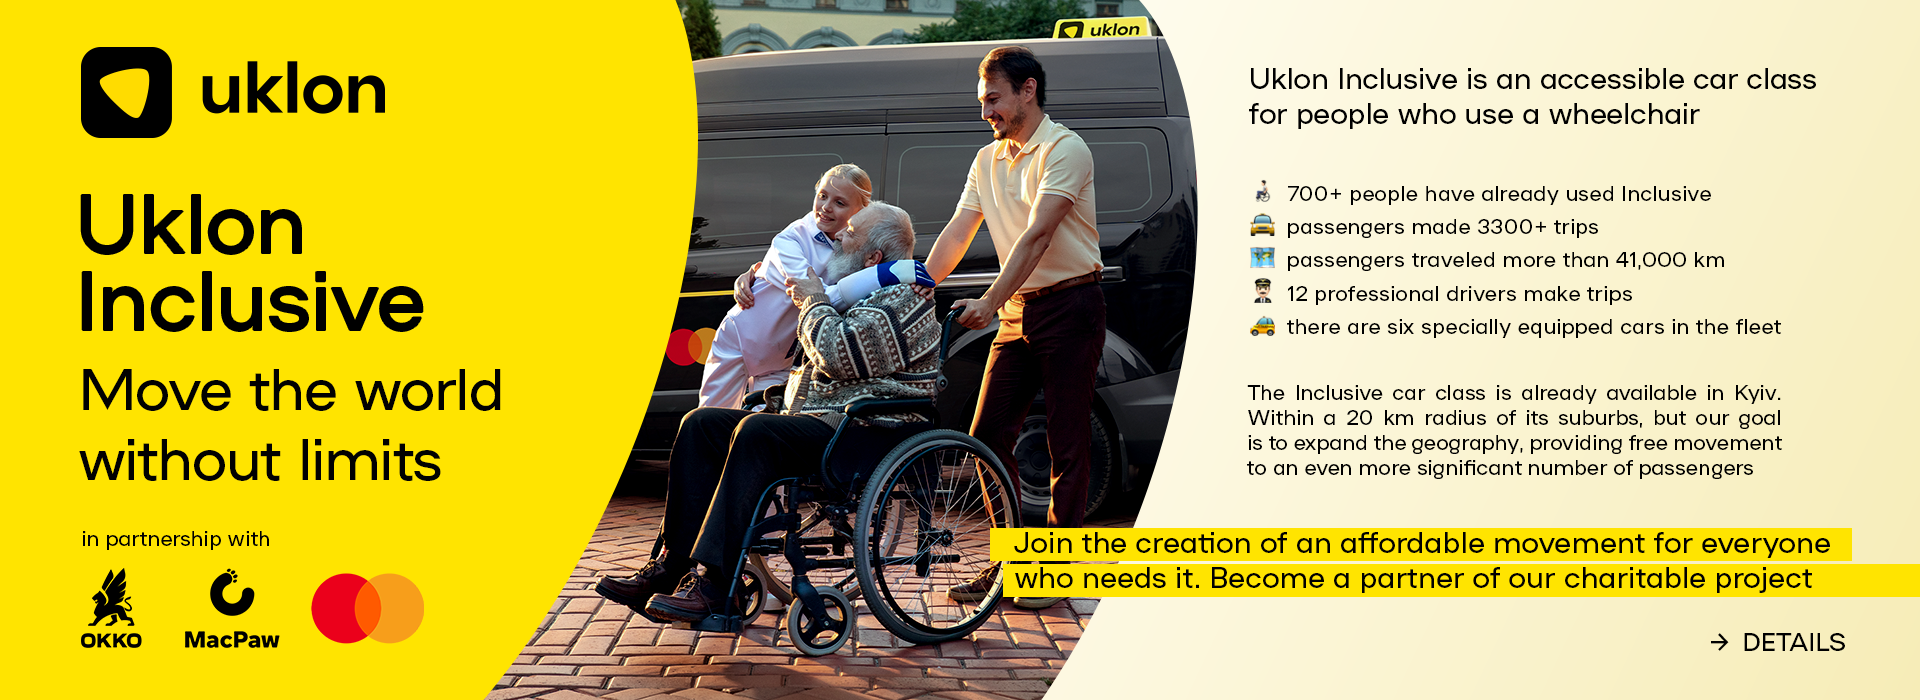 Uklon Launched a Car Class for People with Disabilities Who Use Wheelchairs